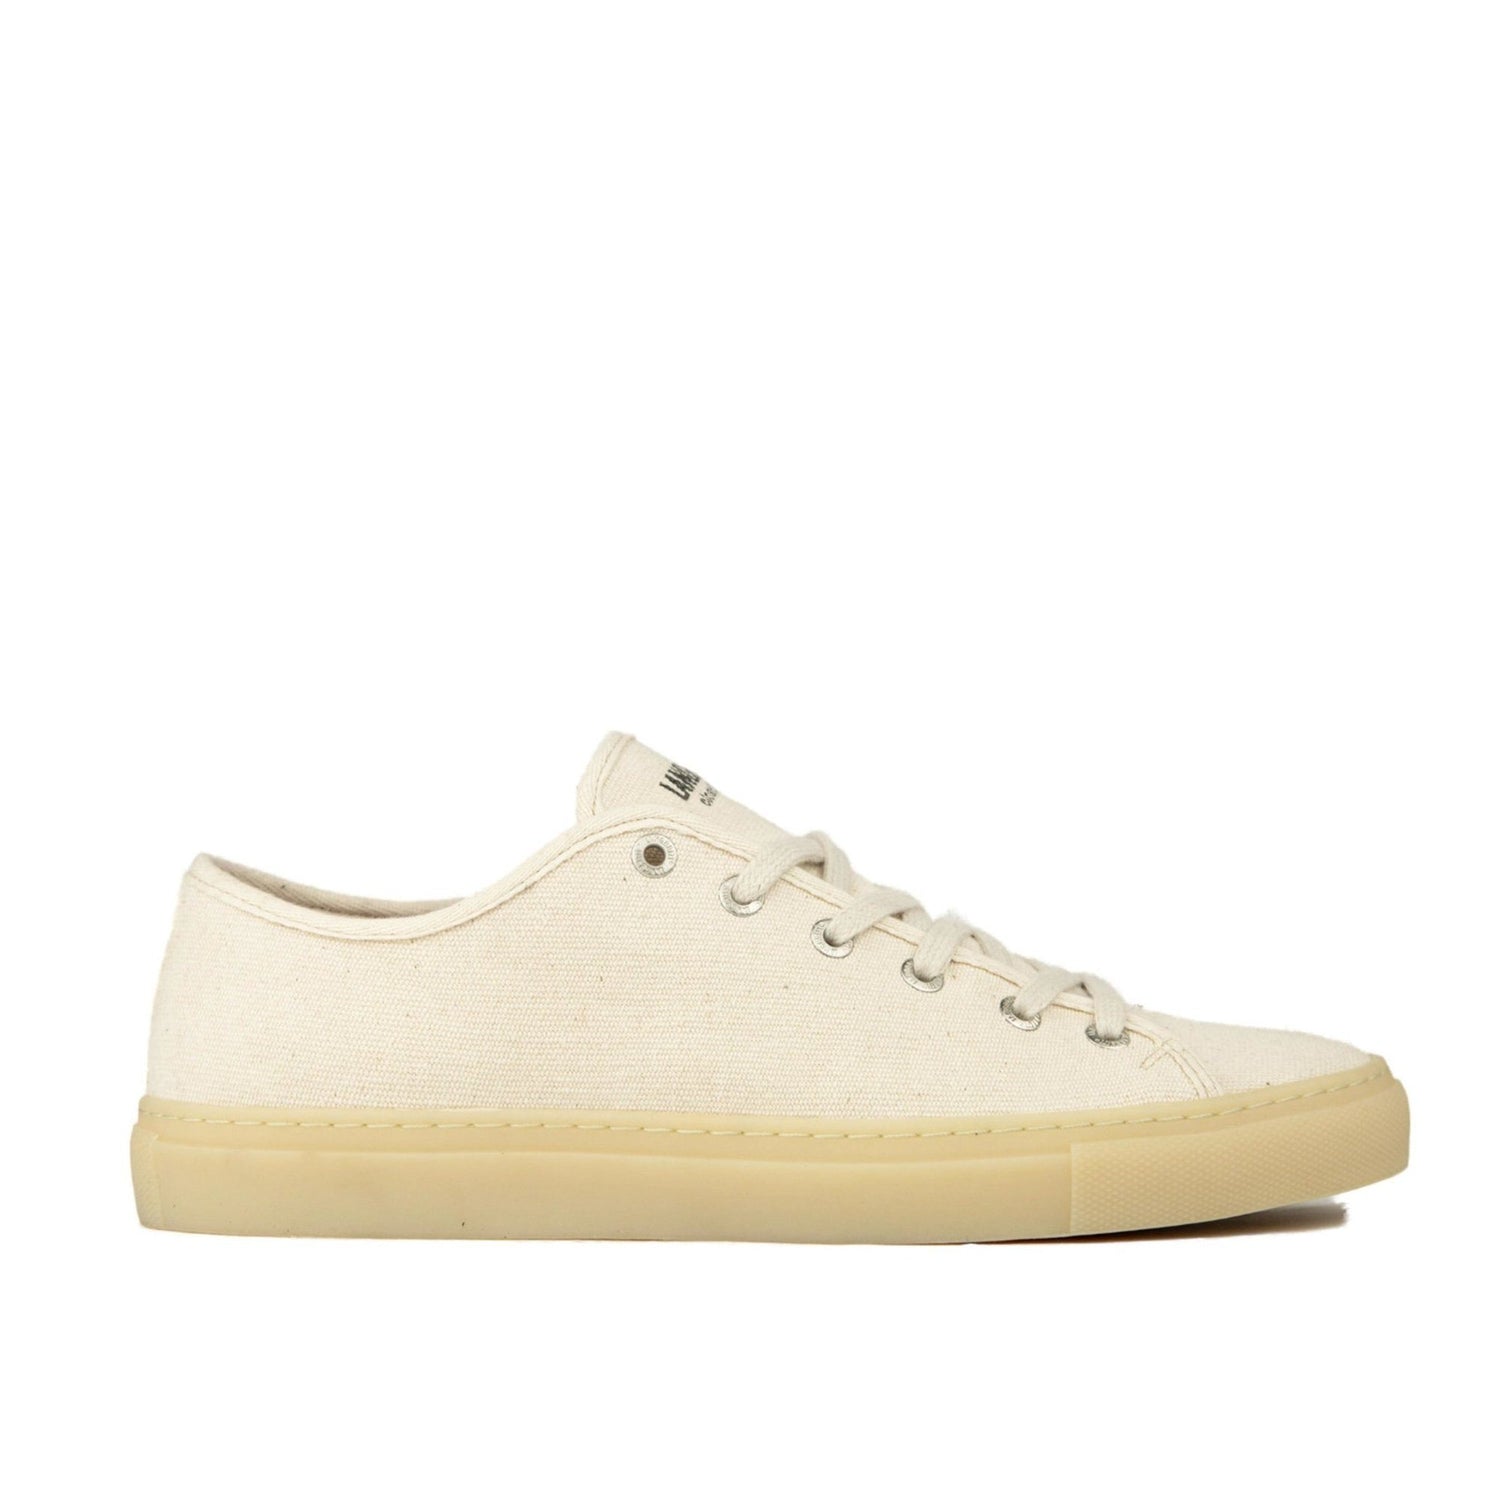 Langbrett SUM - Unisex Ecological Shoes - Made From Recycled Cotton White Shoes